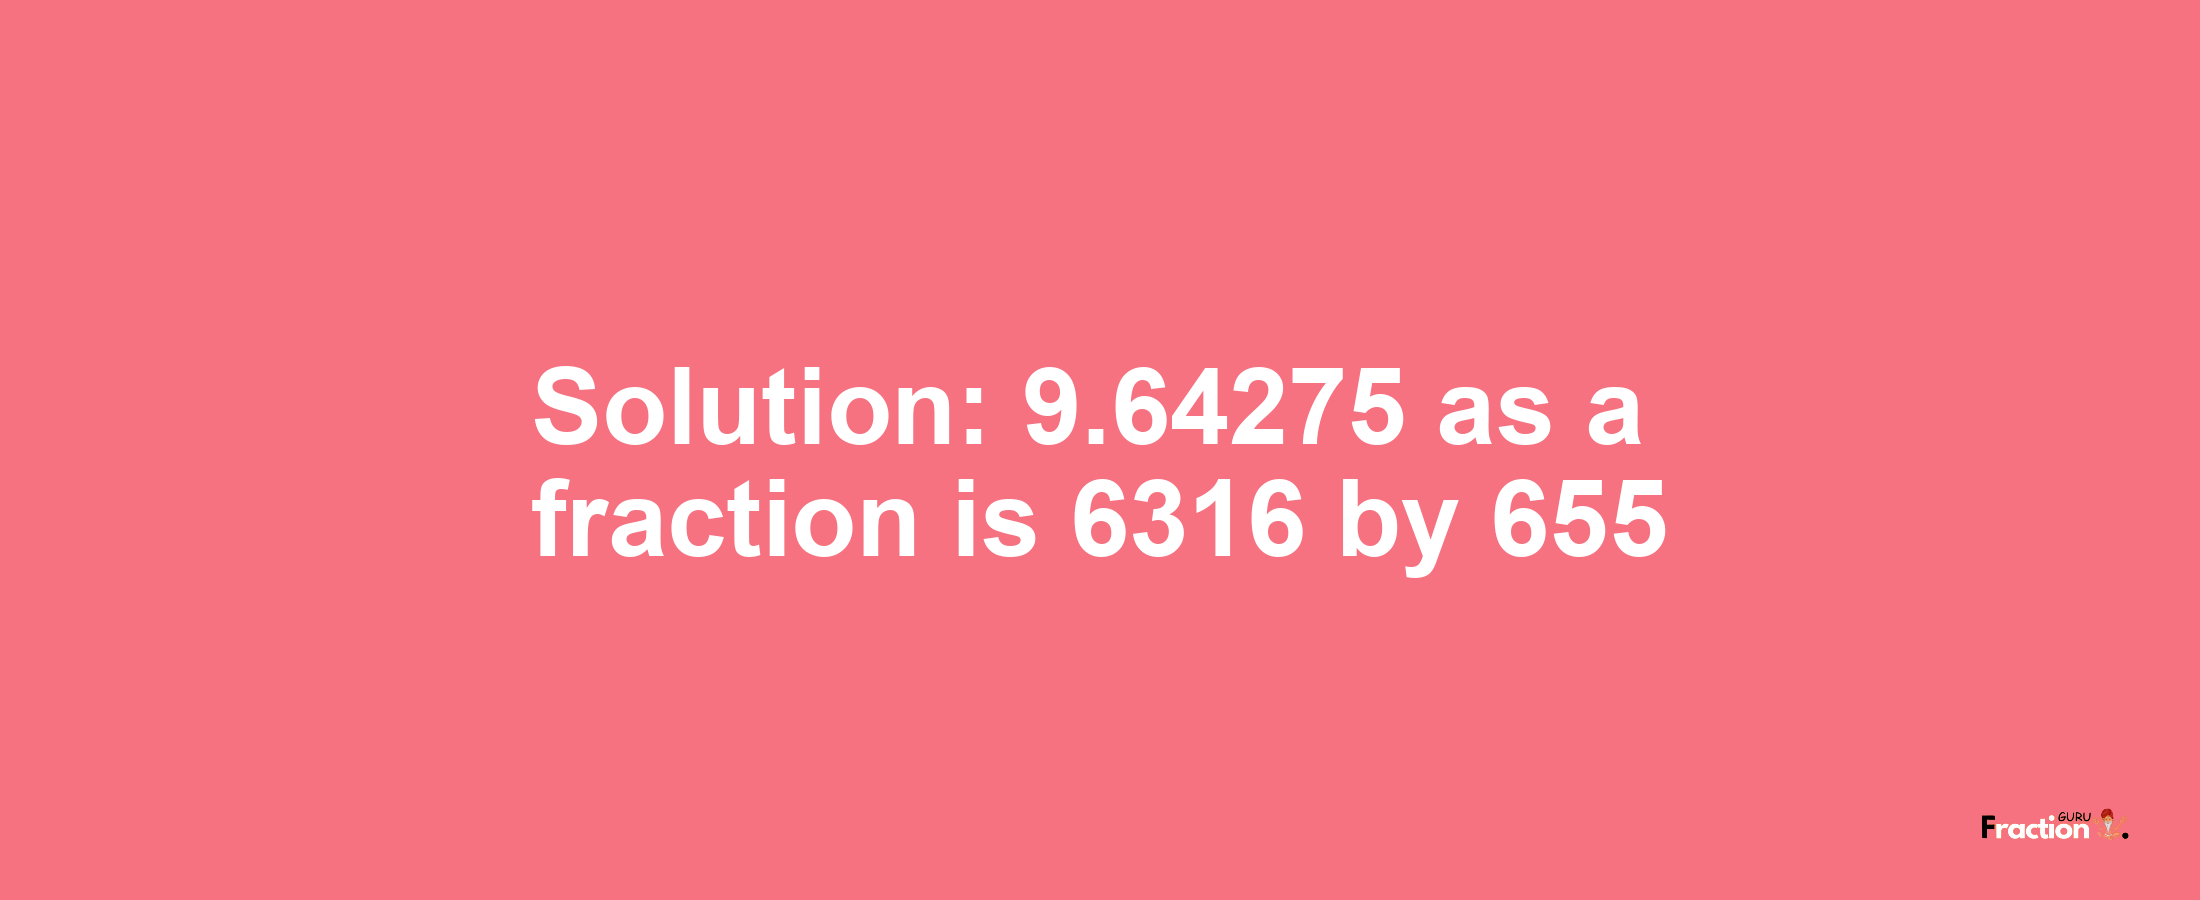 Solution:9.64275 as a fraction is 6316/655